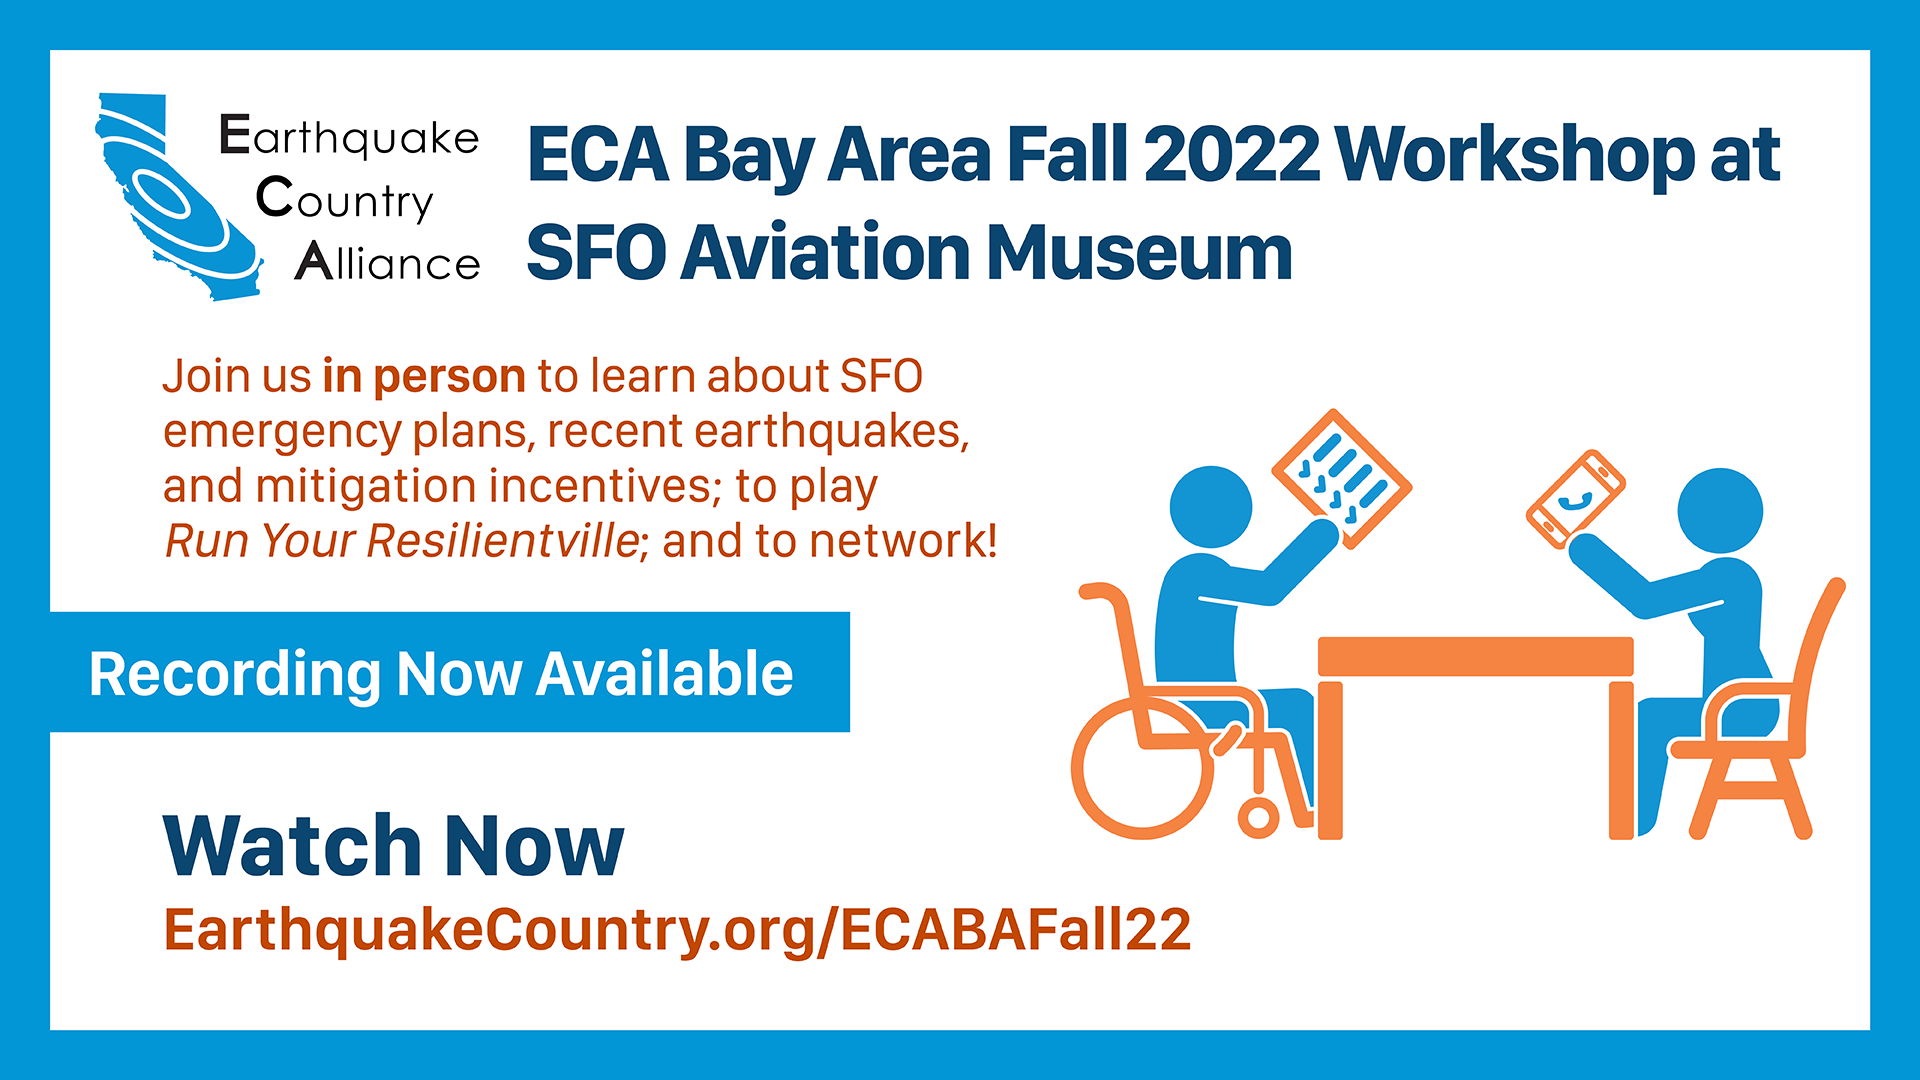 Graphic about the ECA Bay Area Fall 2022 Workshop with date with a graphic showing two people creating an emergency plan.